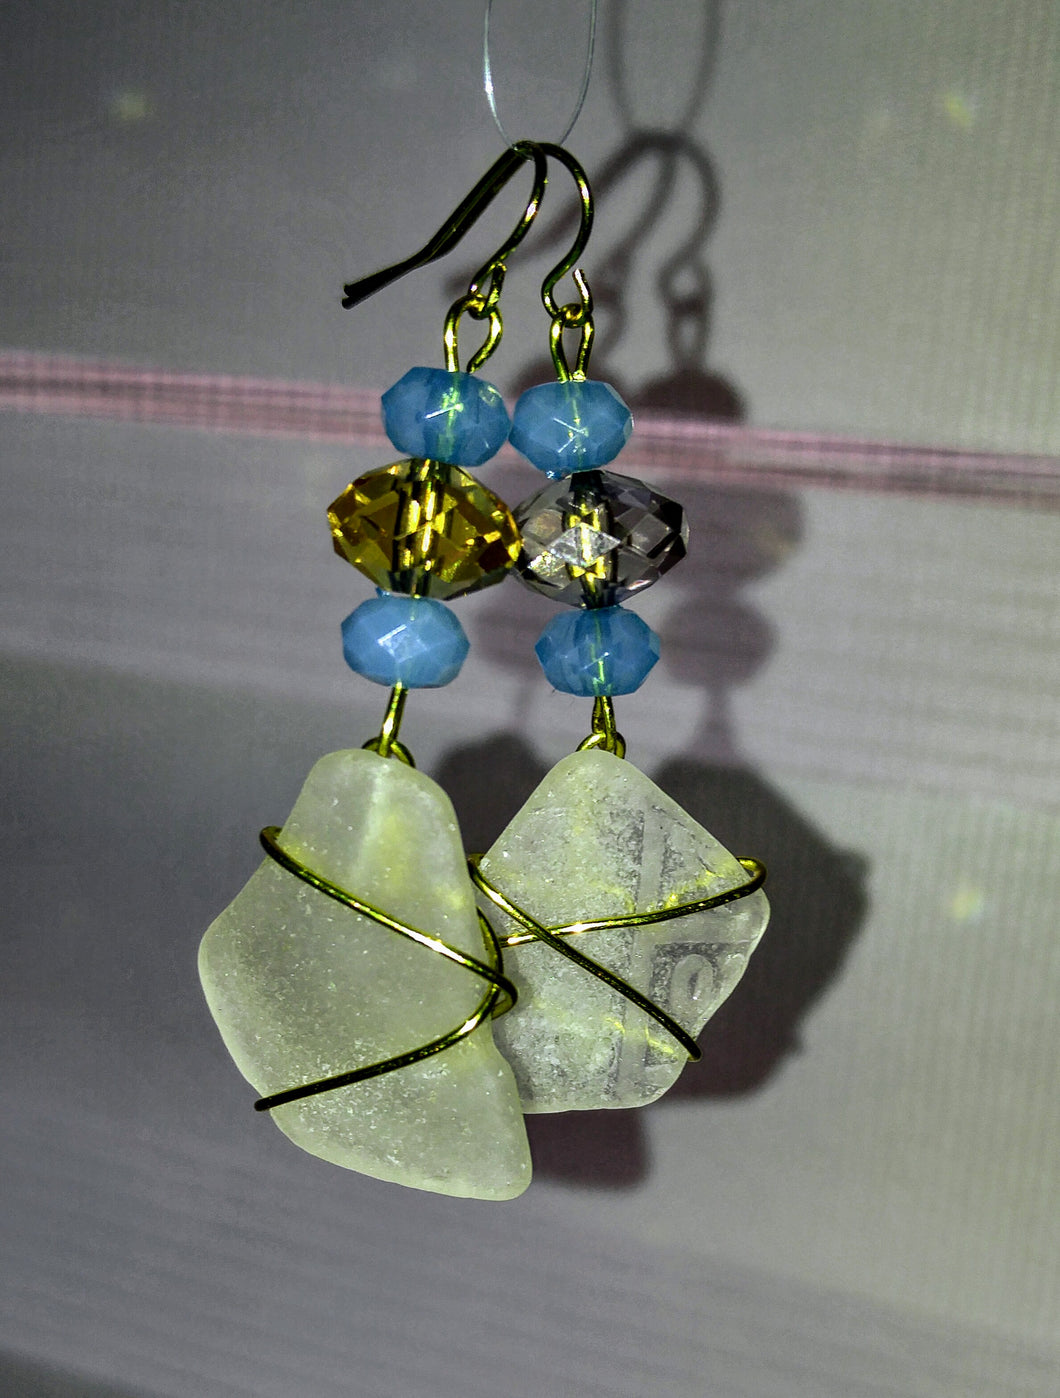 Seaglass gypsy earrings with beautifully mismatched middle beads!